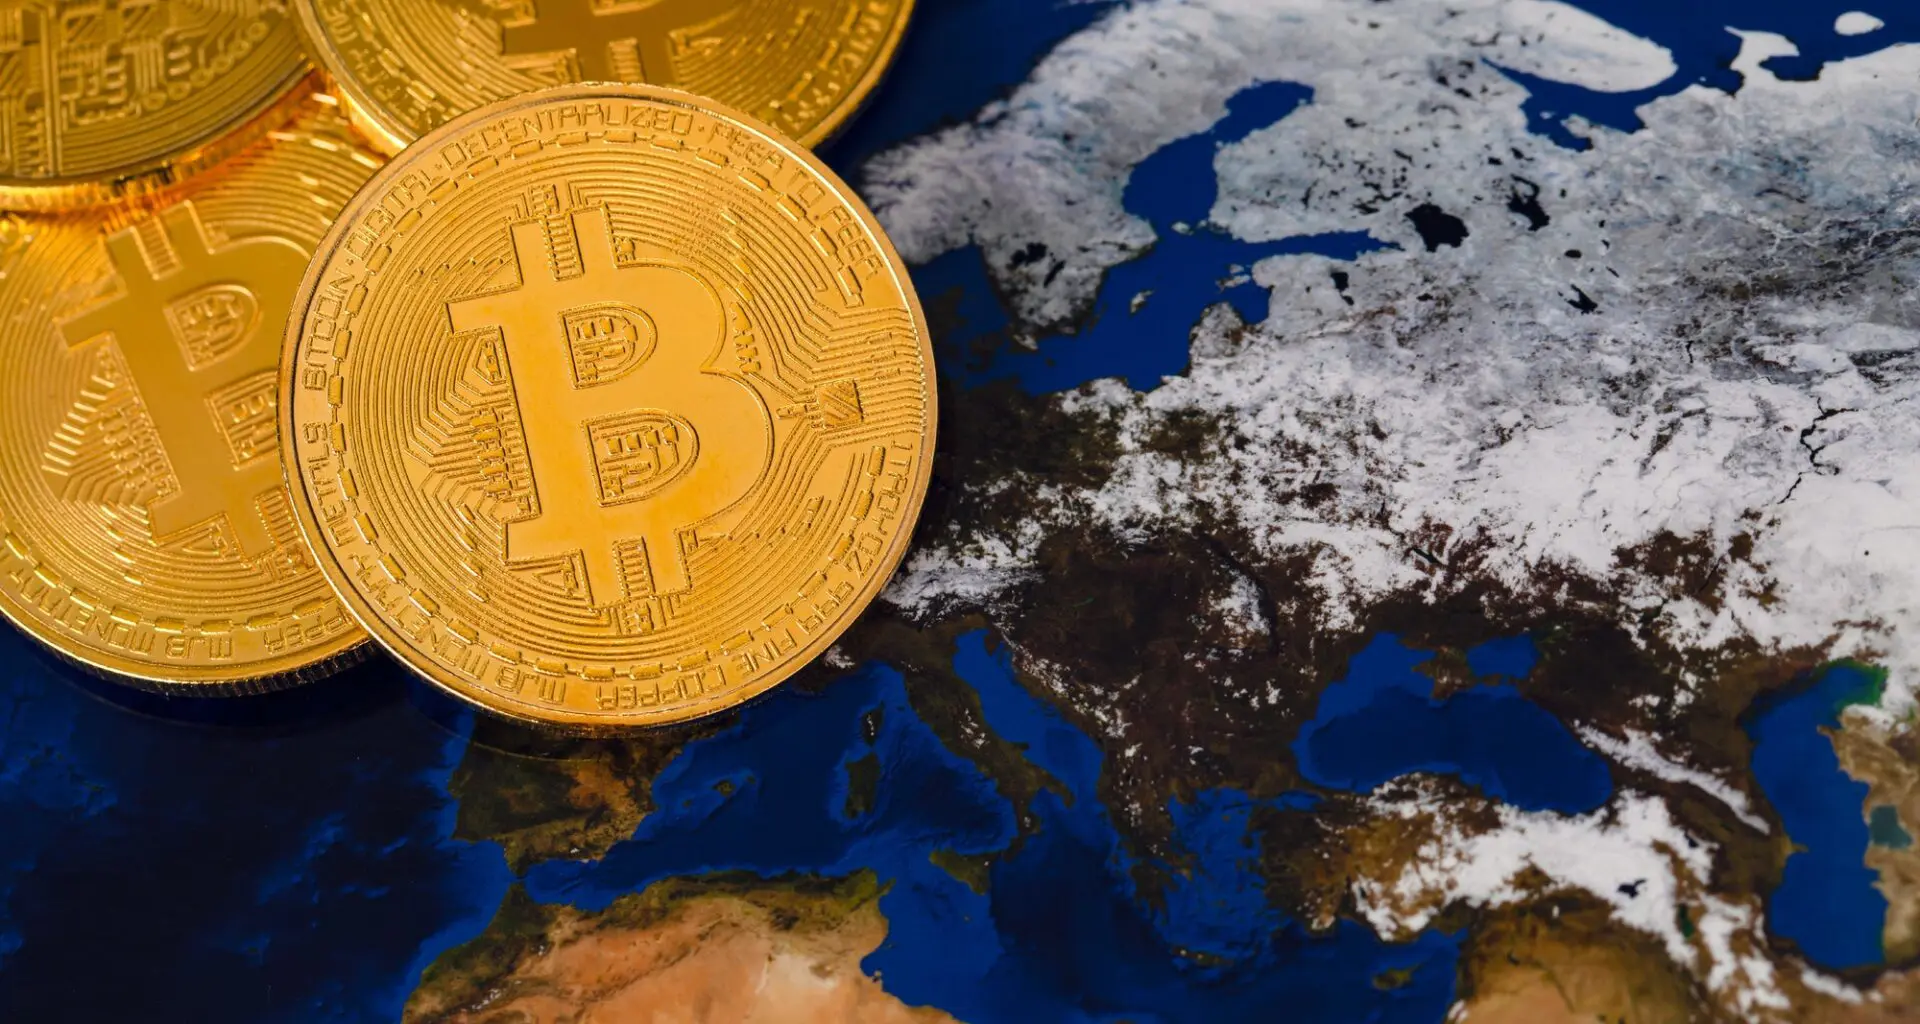 Golden Shiny Bitcoin Crypto Currency Coins On World Map